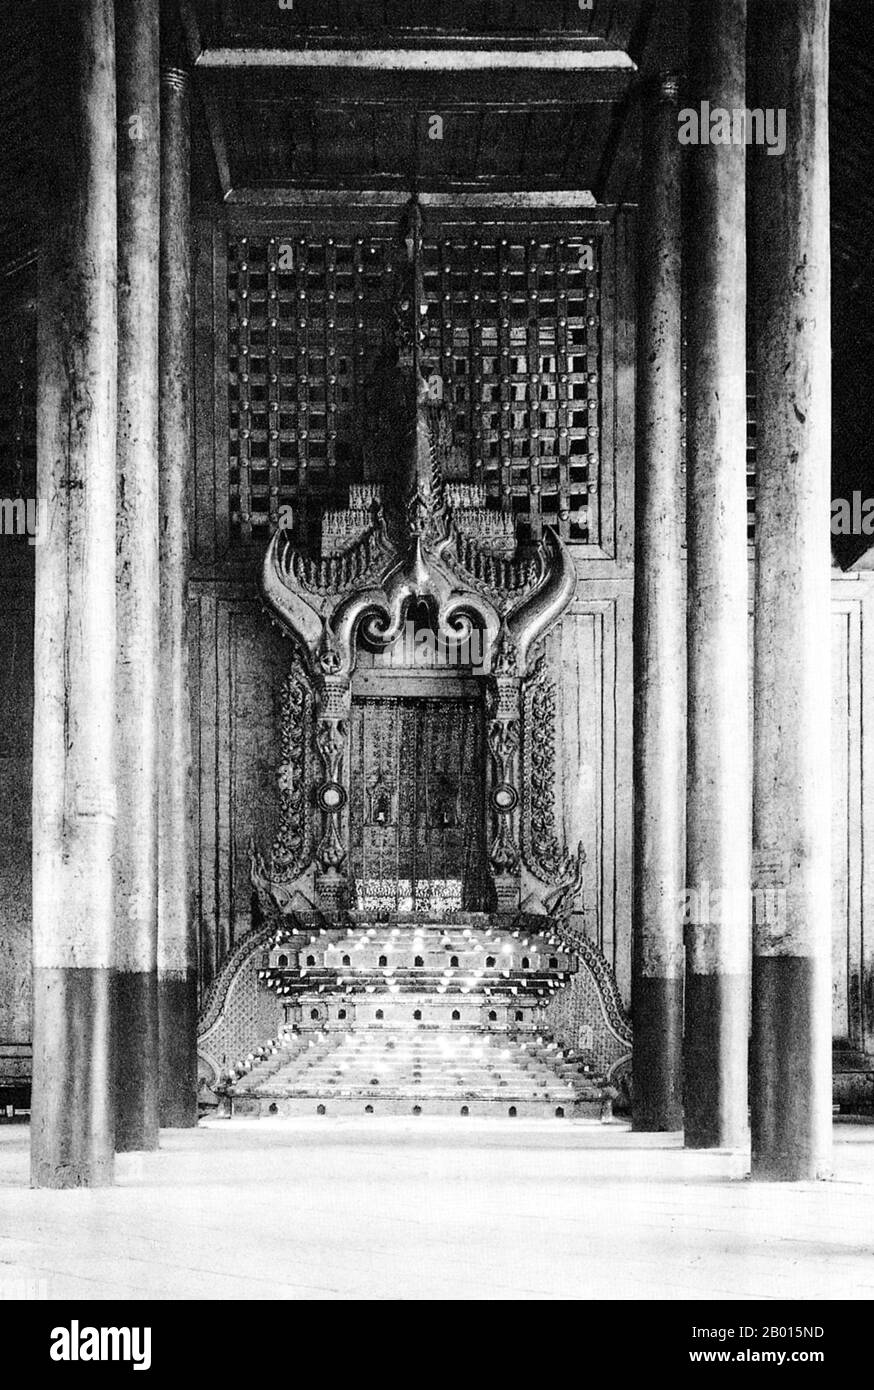 Burma/Myanmar: Entrance to the Lily Throne Room in Mandalay Palace, c. 1920s.  Mandalay Palace was constructed between 1857 and 1859 as part of King Mindon's new royal capital city of Mandalay, in fulfillment of a Buddhist prophecy that a religious centre would be built at the foot of Mandalay Hill. In 1861 the court was transferred to the newly built city from the previous capital of Amarapura.  The plan of Mandalay Palace largely follows the traditional Burmese palace design, inside a walled fort surrounded by a moat. The palace itself is at the centre of the citadel and faces east. Stock Photo